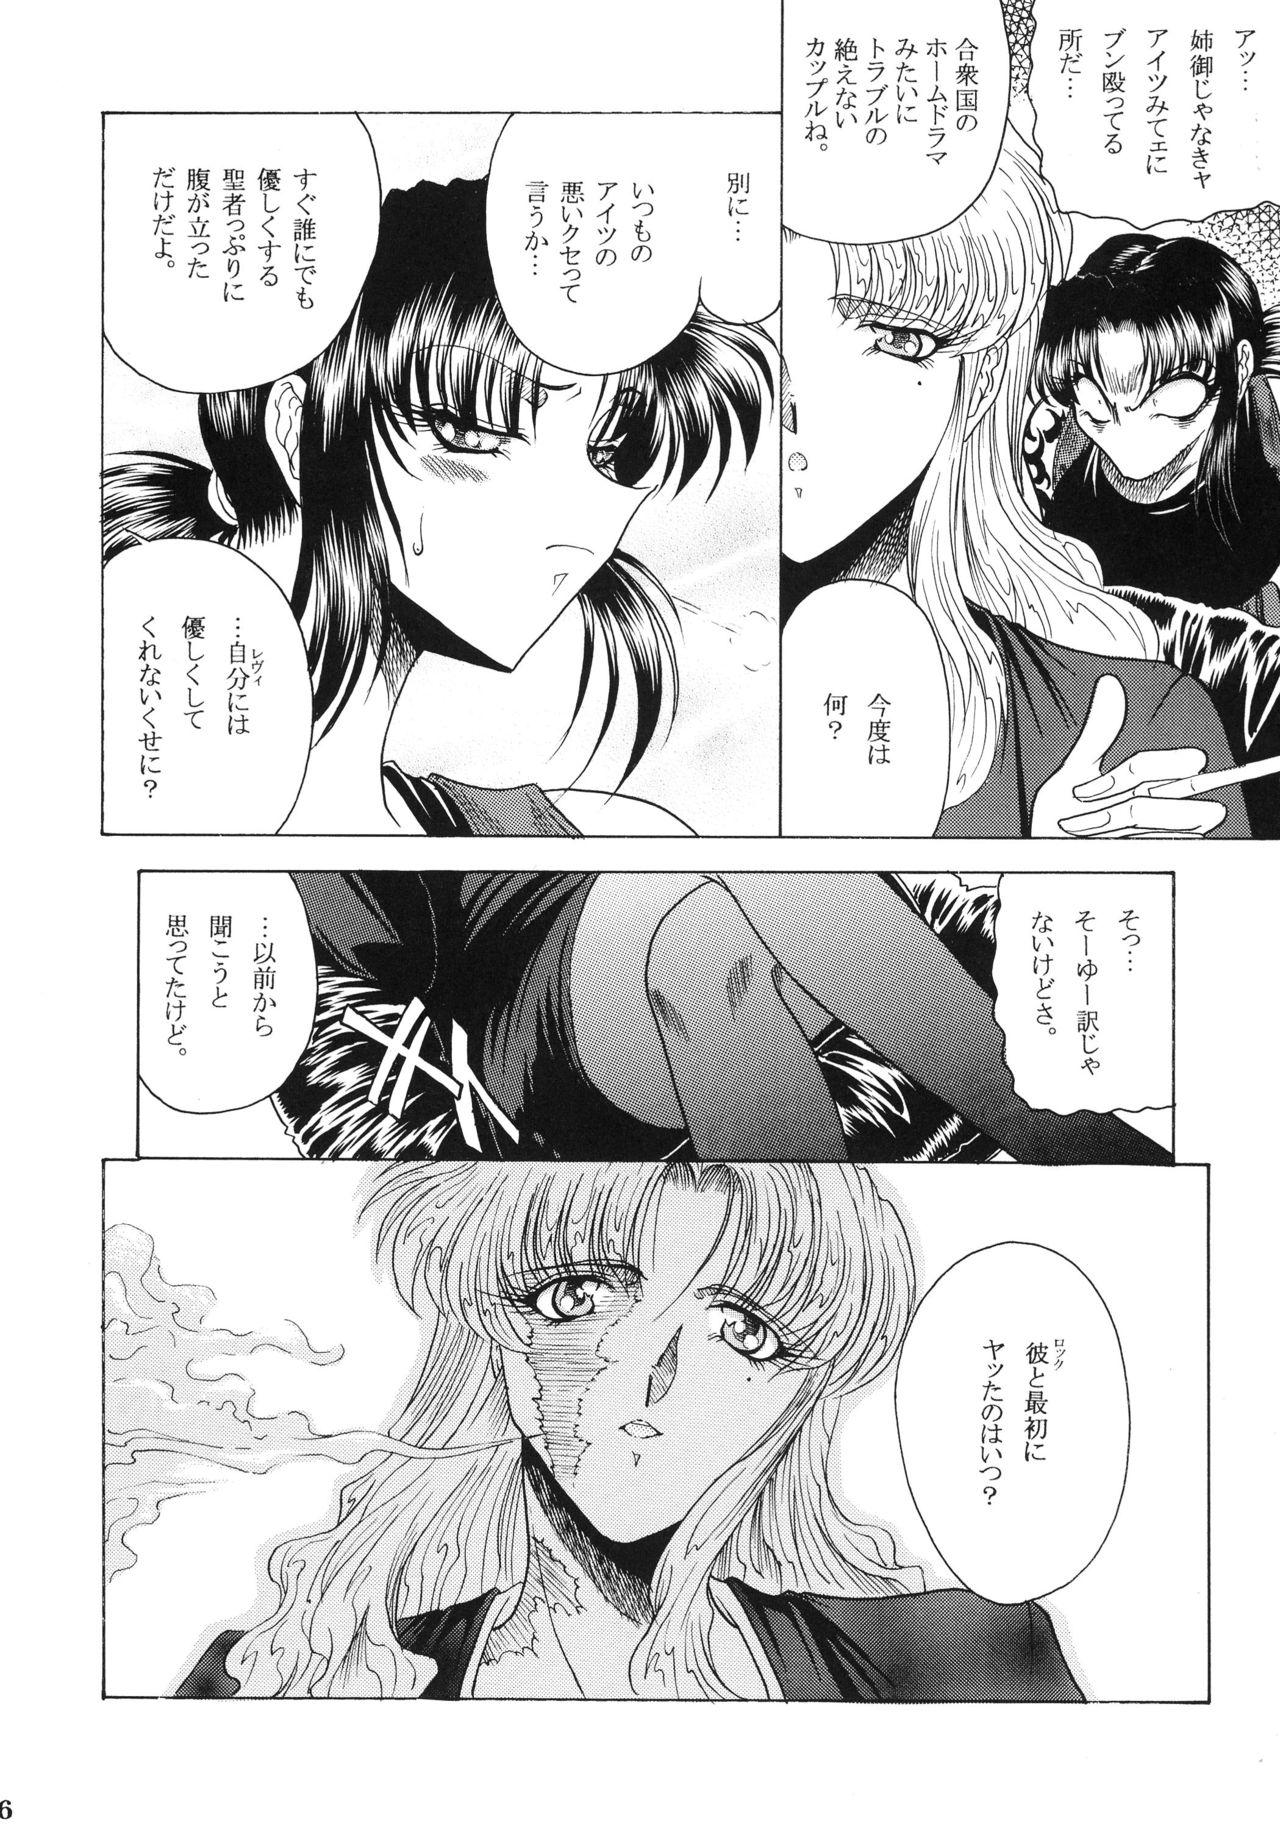 Best Blowjob ZONE 38 China Syndrome - Black lagoon Emo - Page 5